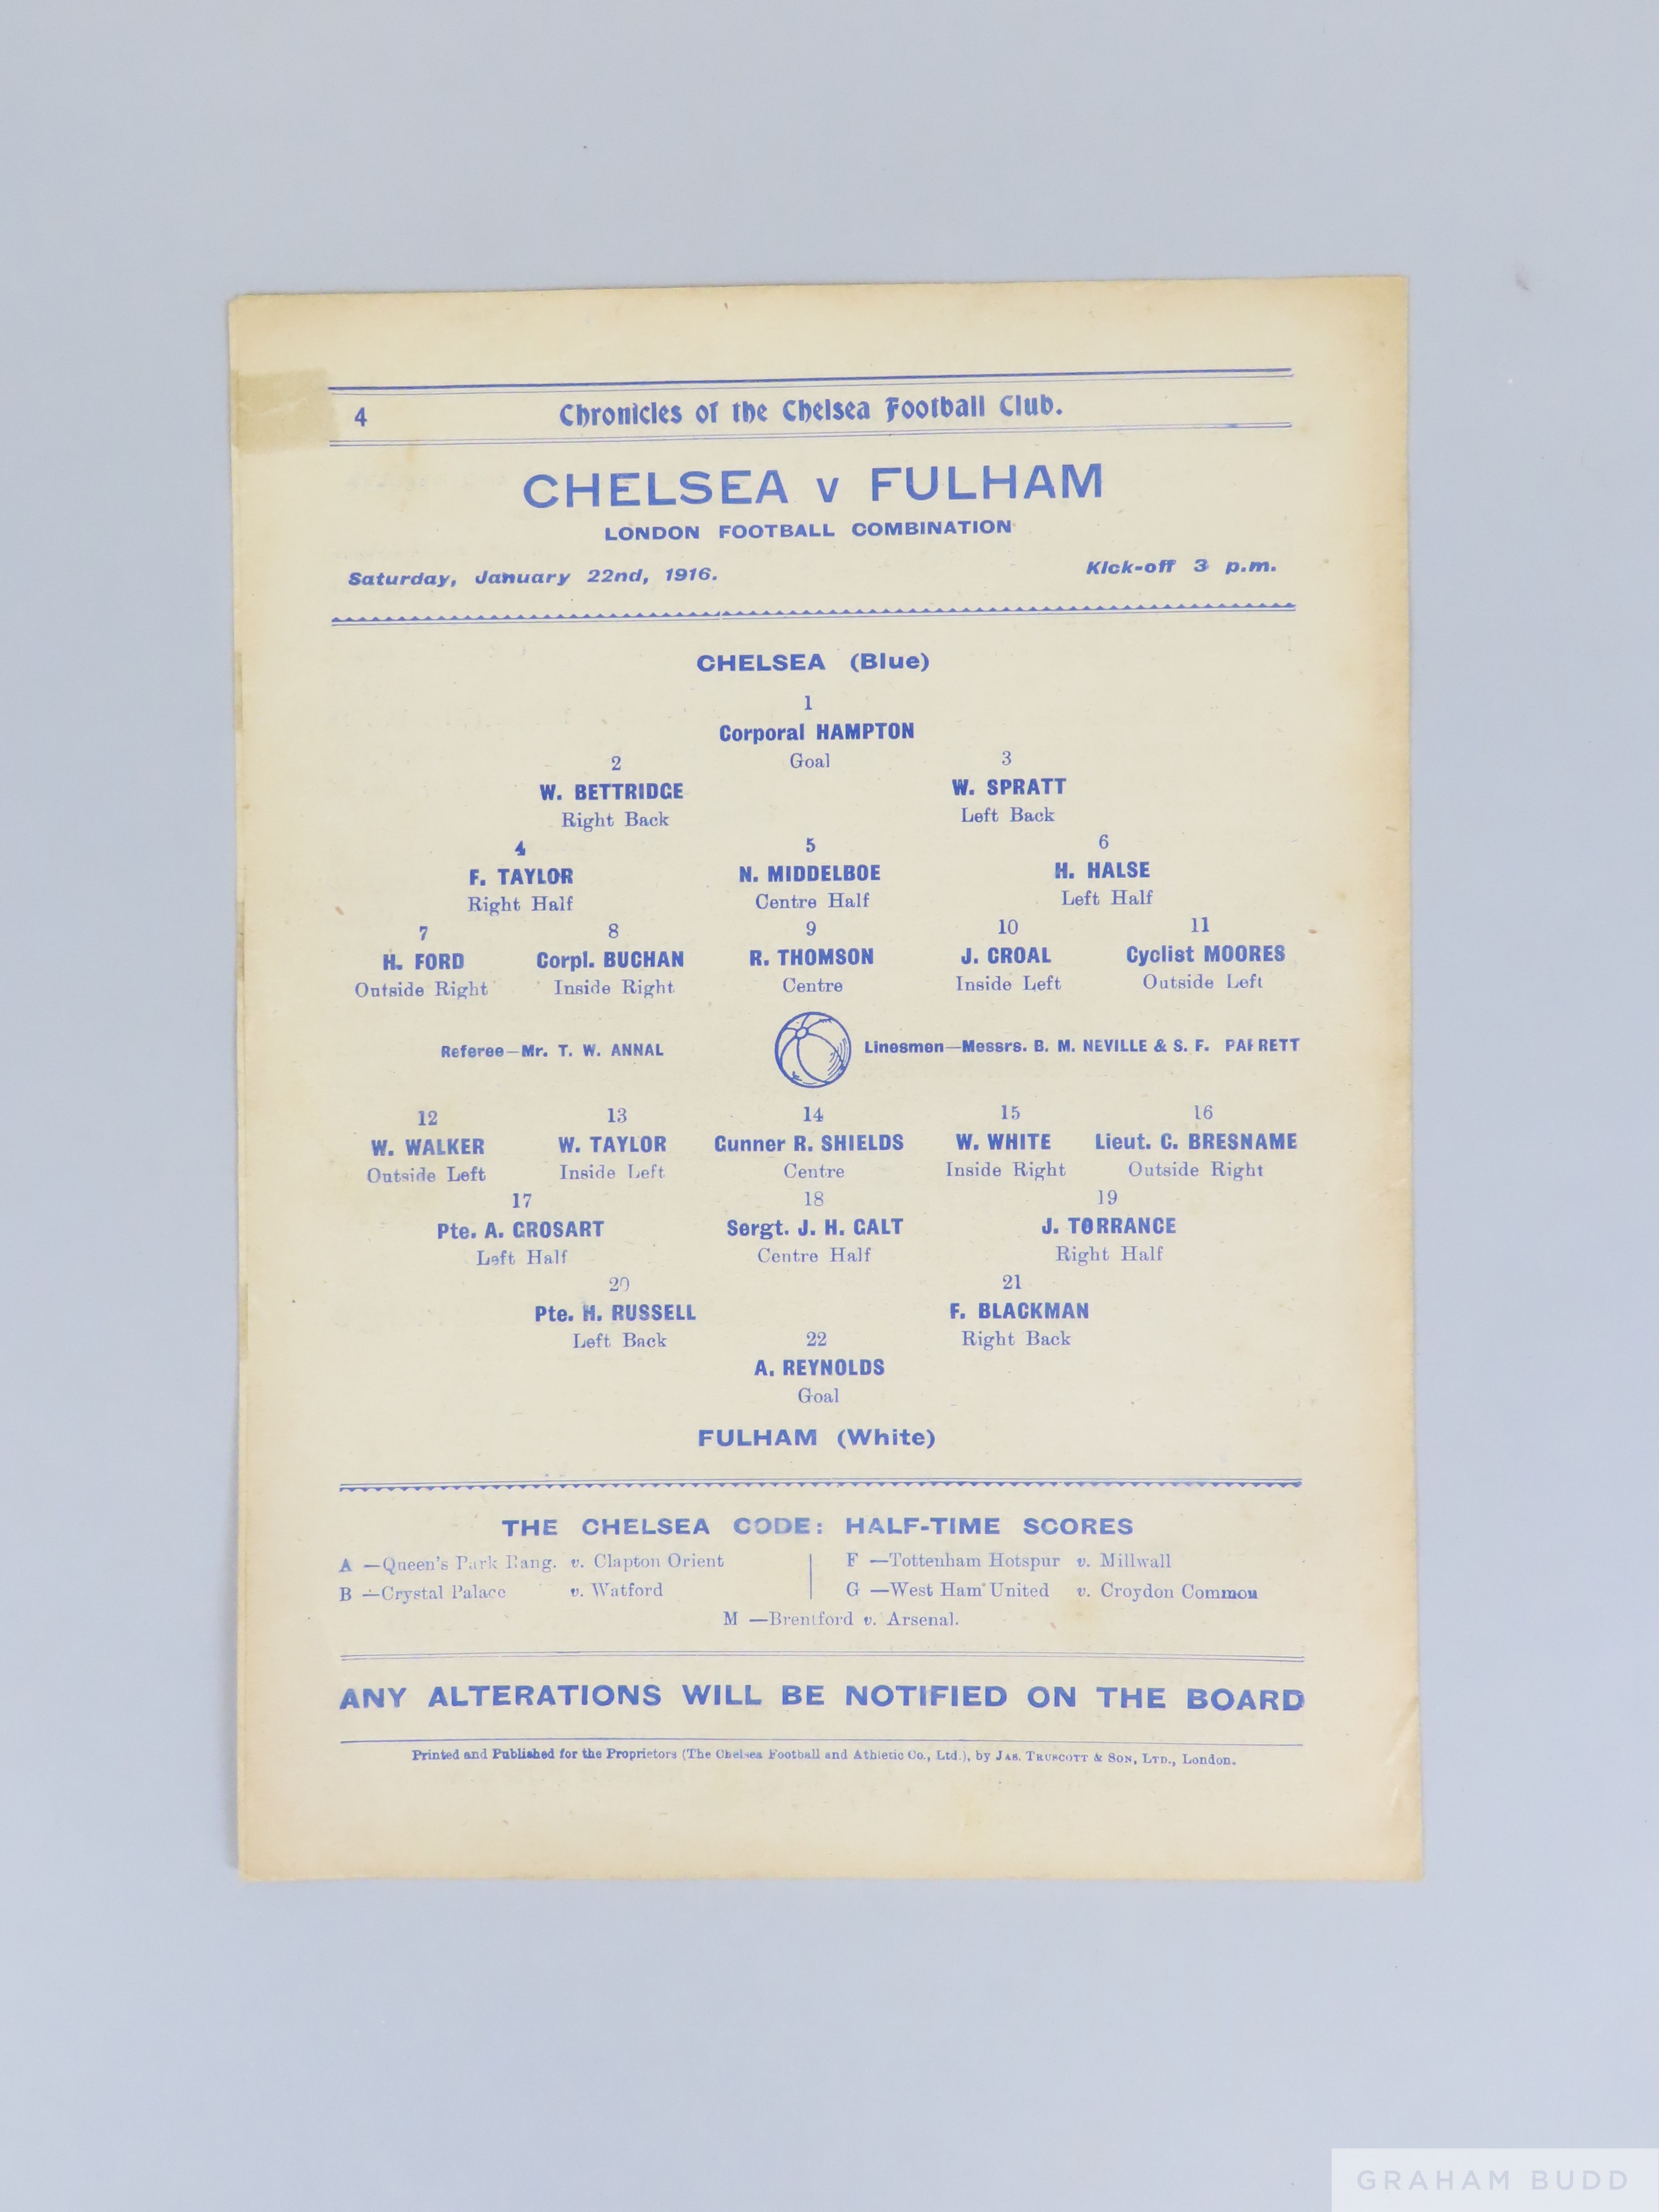 Chelsea v. Fulham, London Football Combination match programme, 22nd January 1916 - Image 2 of 2